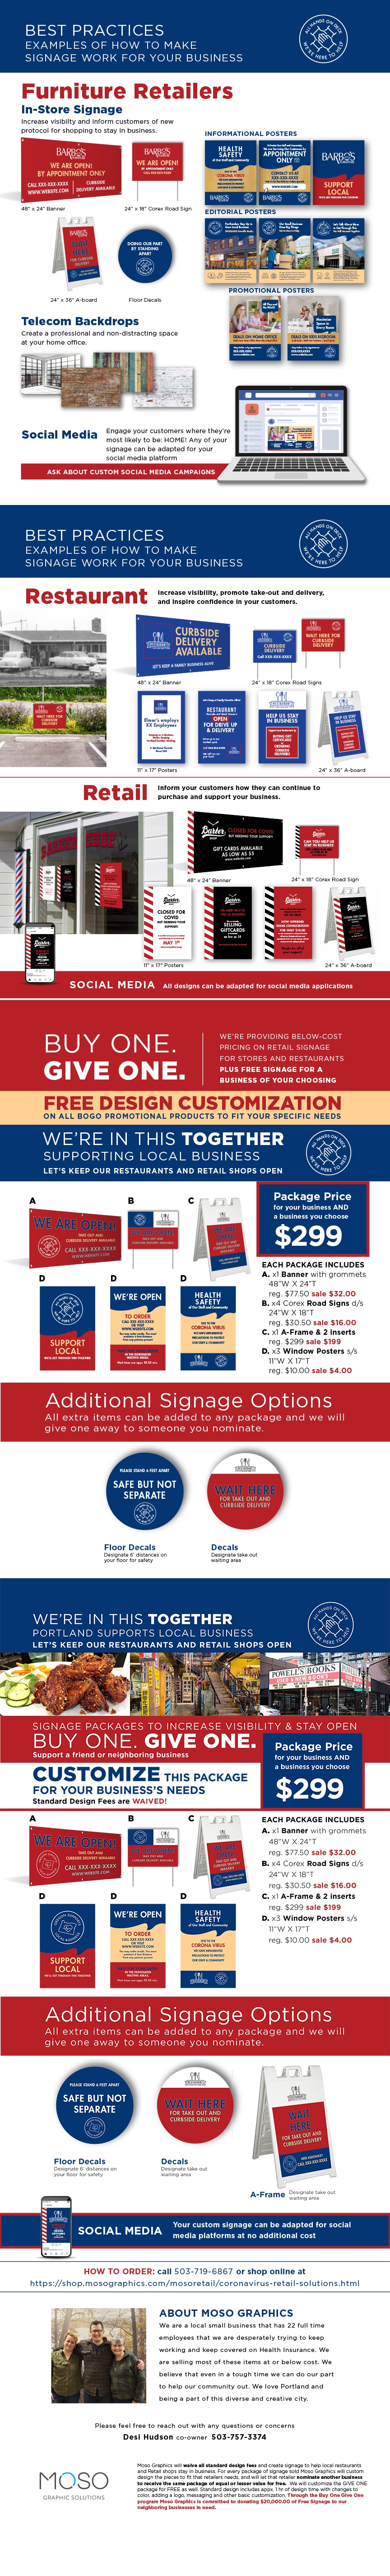 Examples of how to make signage work for your business